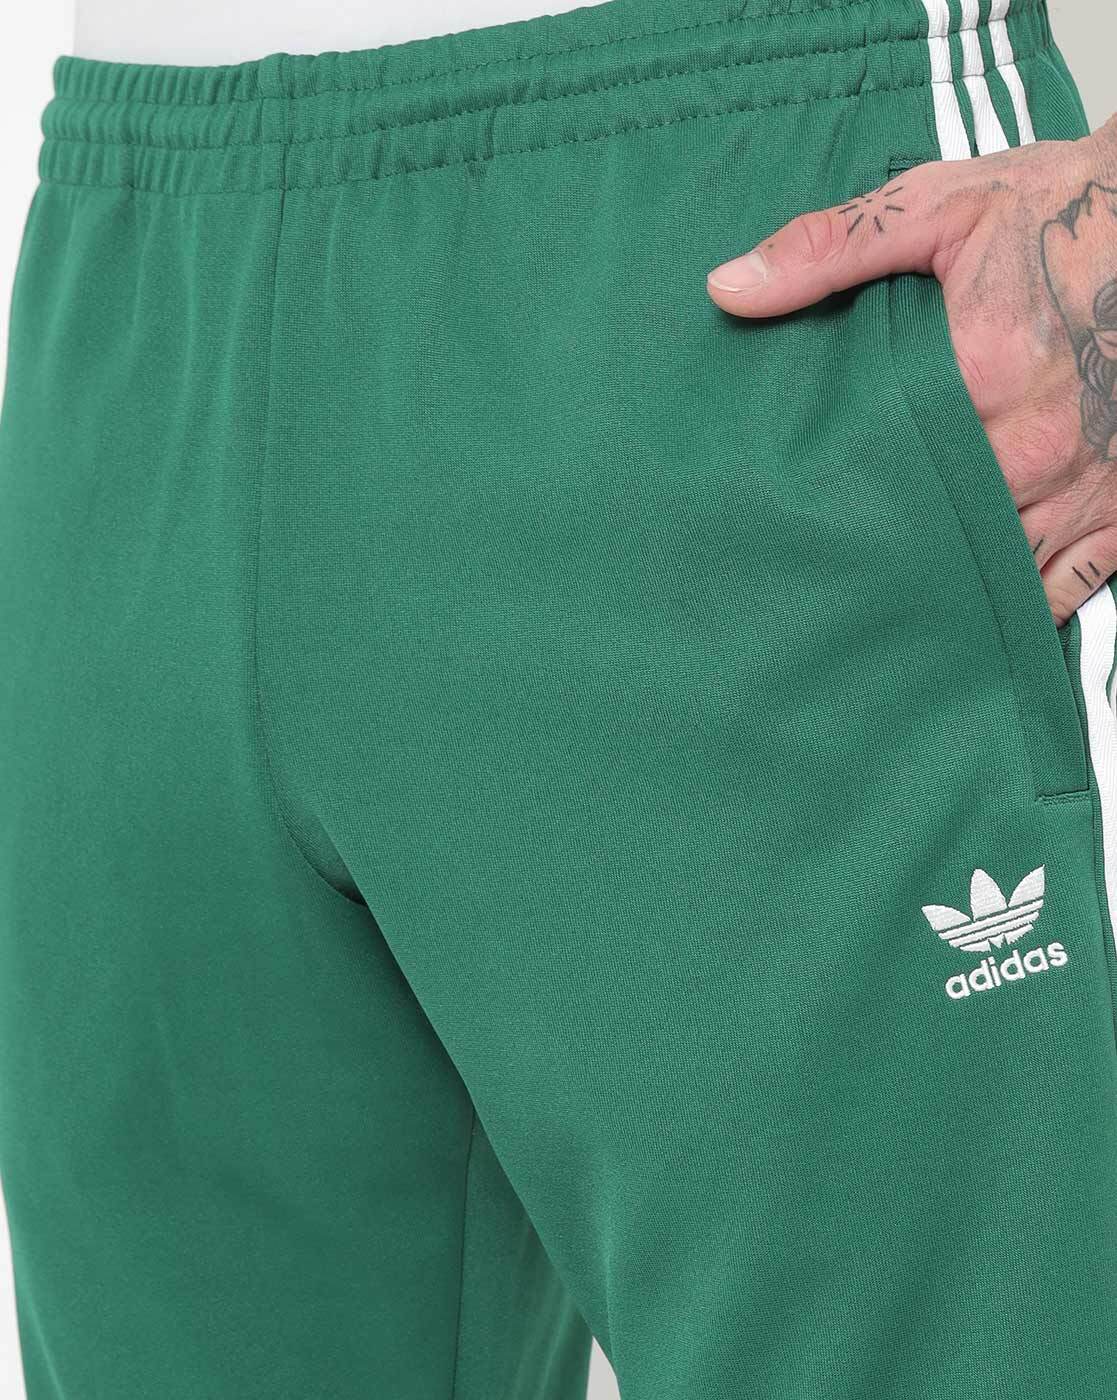 7 Ways To ROCK Green Adidas Pants  Mens Outfit Ideas  YouTube